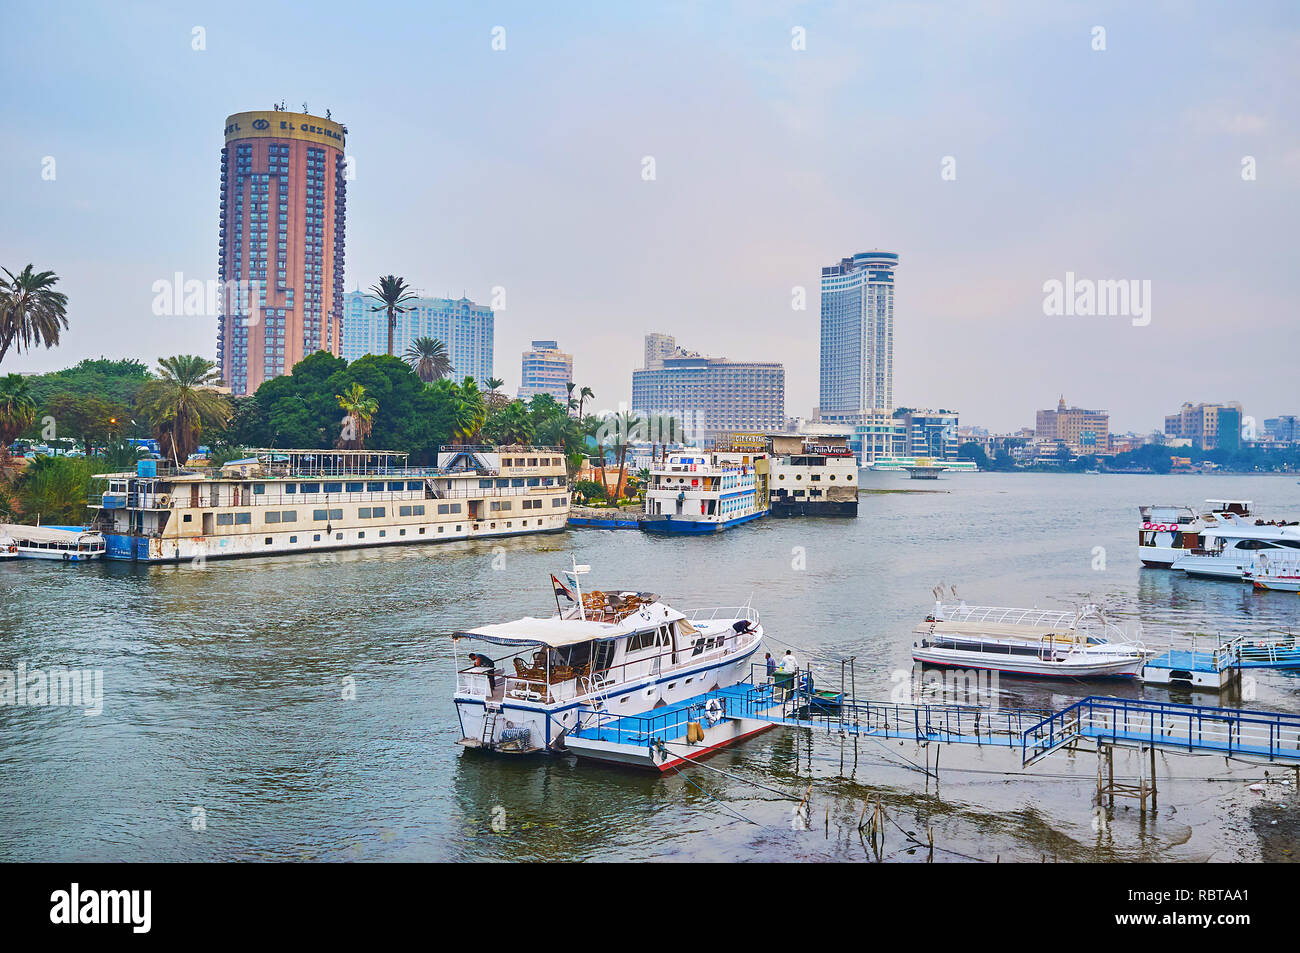 GIZA, EGYPT - DECEMBER 19, 2017: The tourist boats, floating restaurants and cruise ships are moored at the banks of Giza and Gezira Island on Nile ri Stock Photo